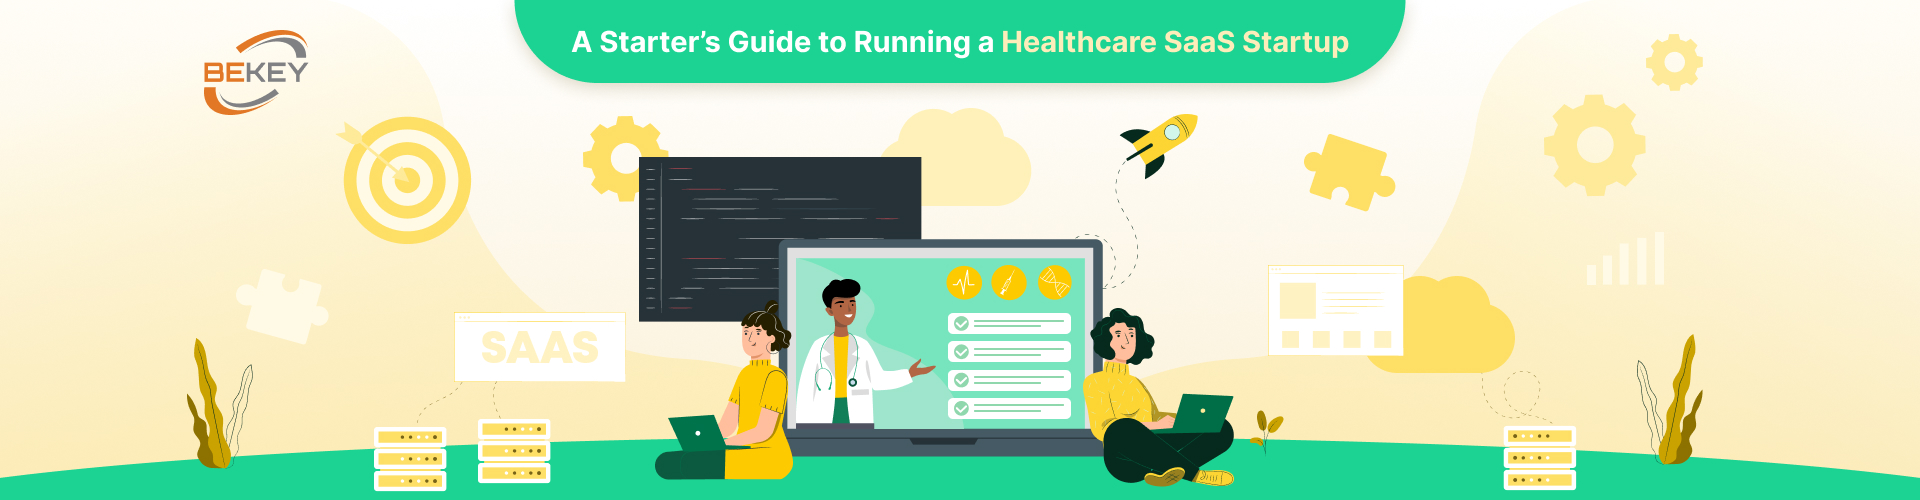 A Starter’s Guide to Running a Healthcare SaaS Startup - image